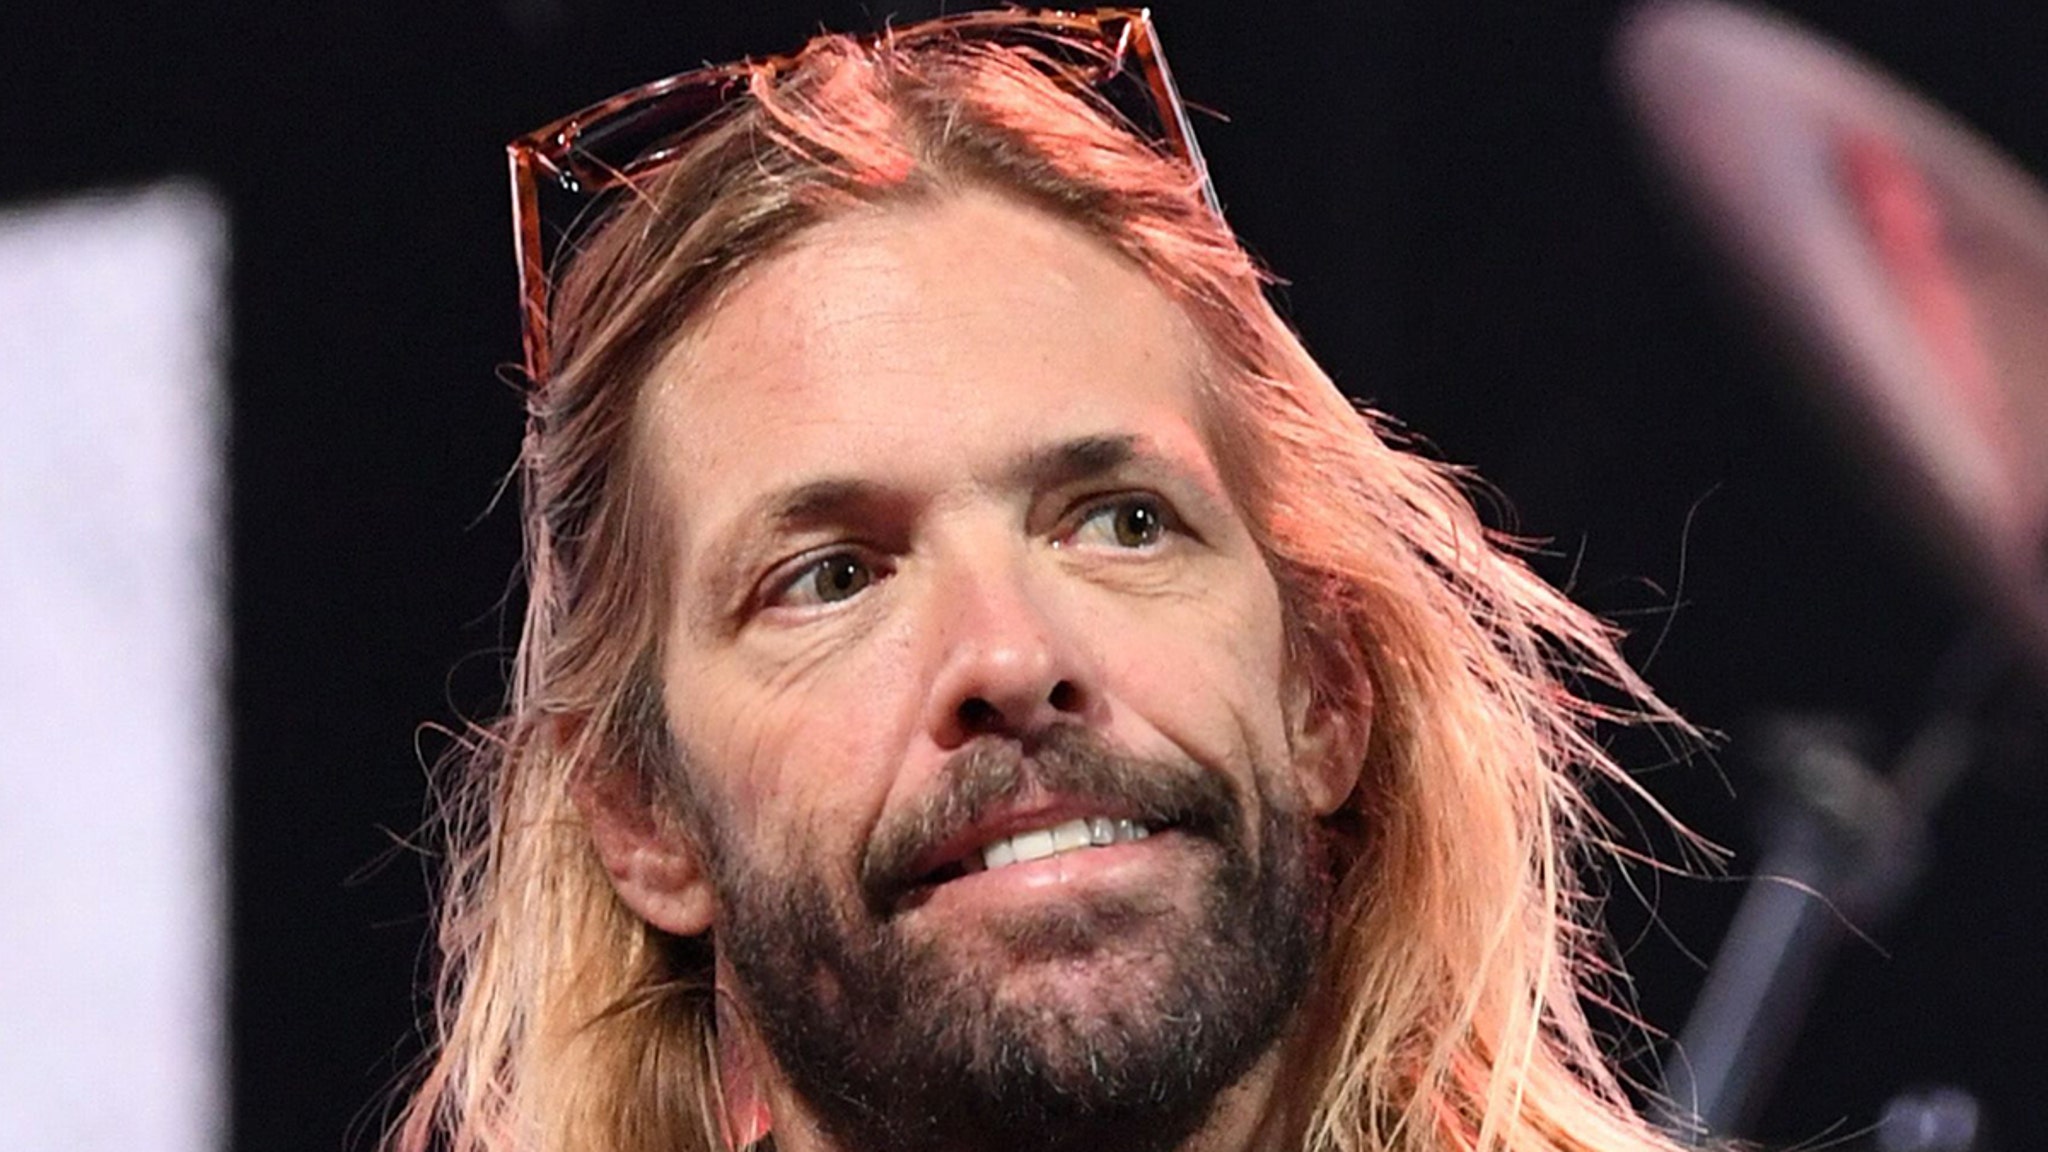 Foo Fighters Planning Taylor Hawkins Tribute Shows to Honor Late Drummer